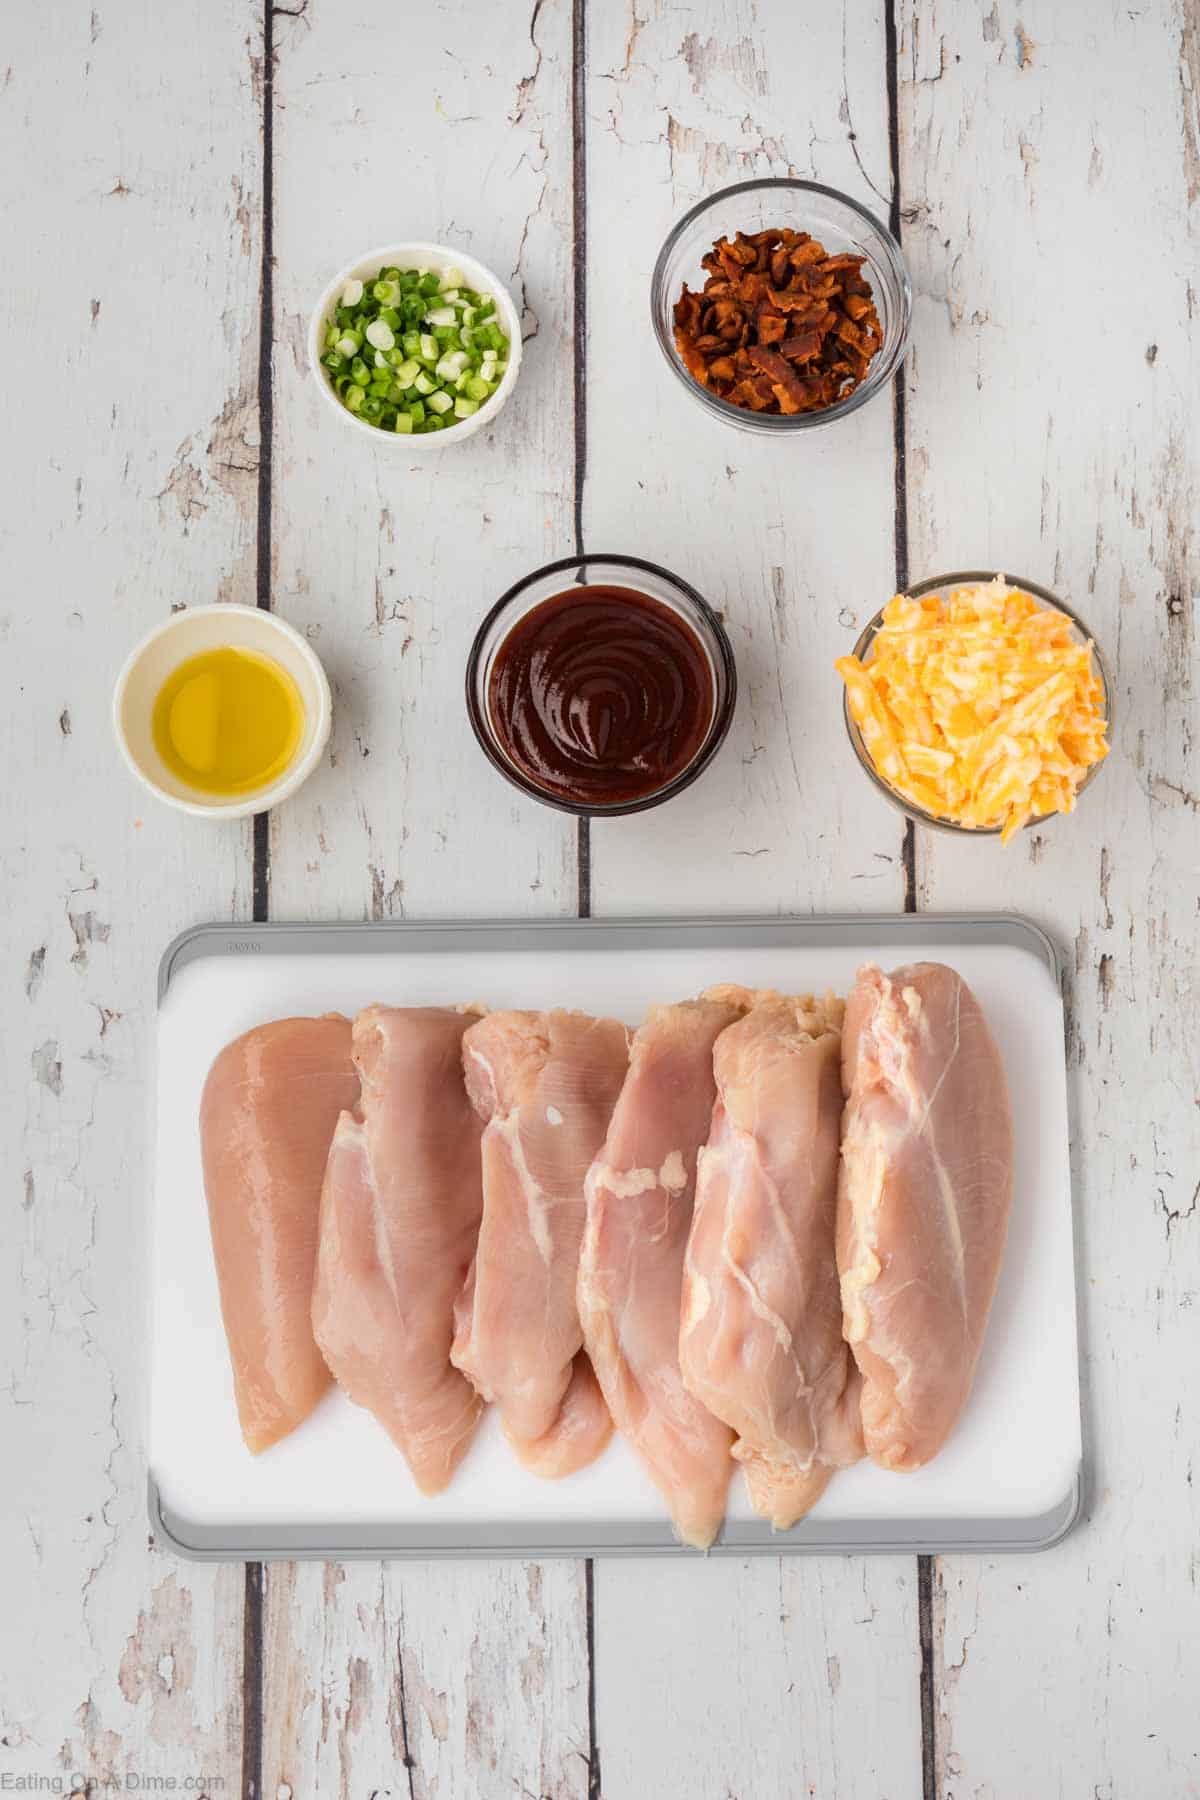 Ingredients - Raw chicken breast on a cutting board, bowl of shredded cheese, BBQ Sauce, oil, chopped green onions and chopped bacon